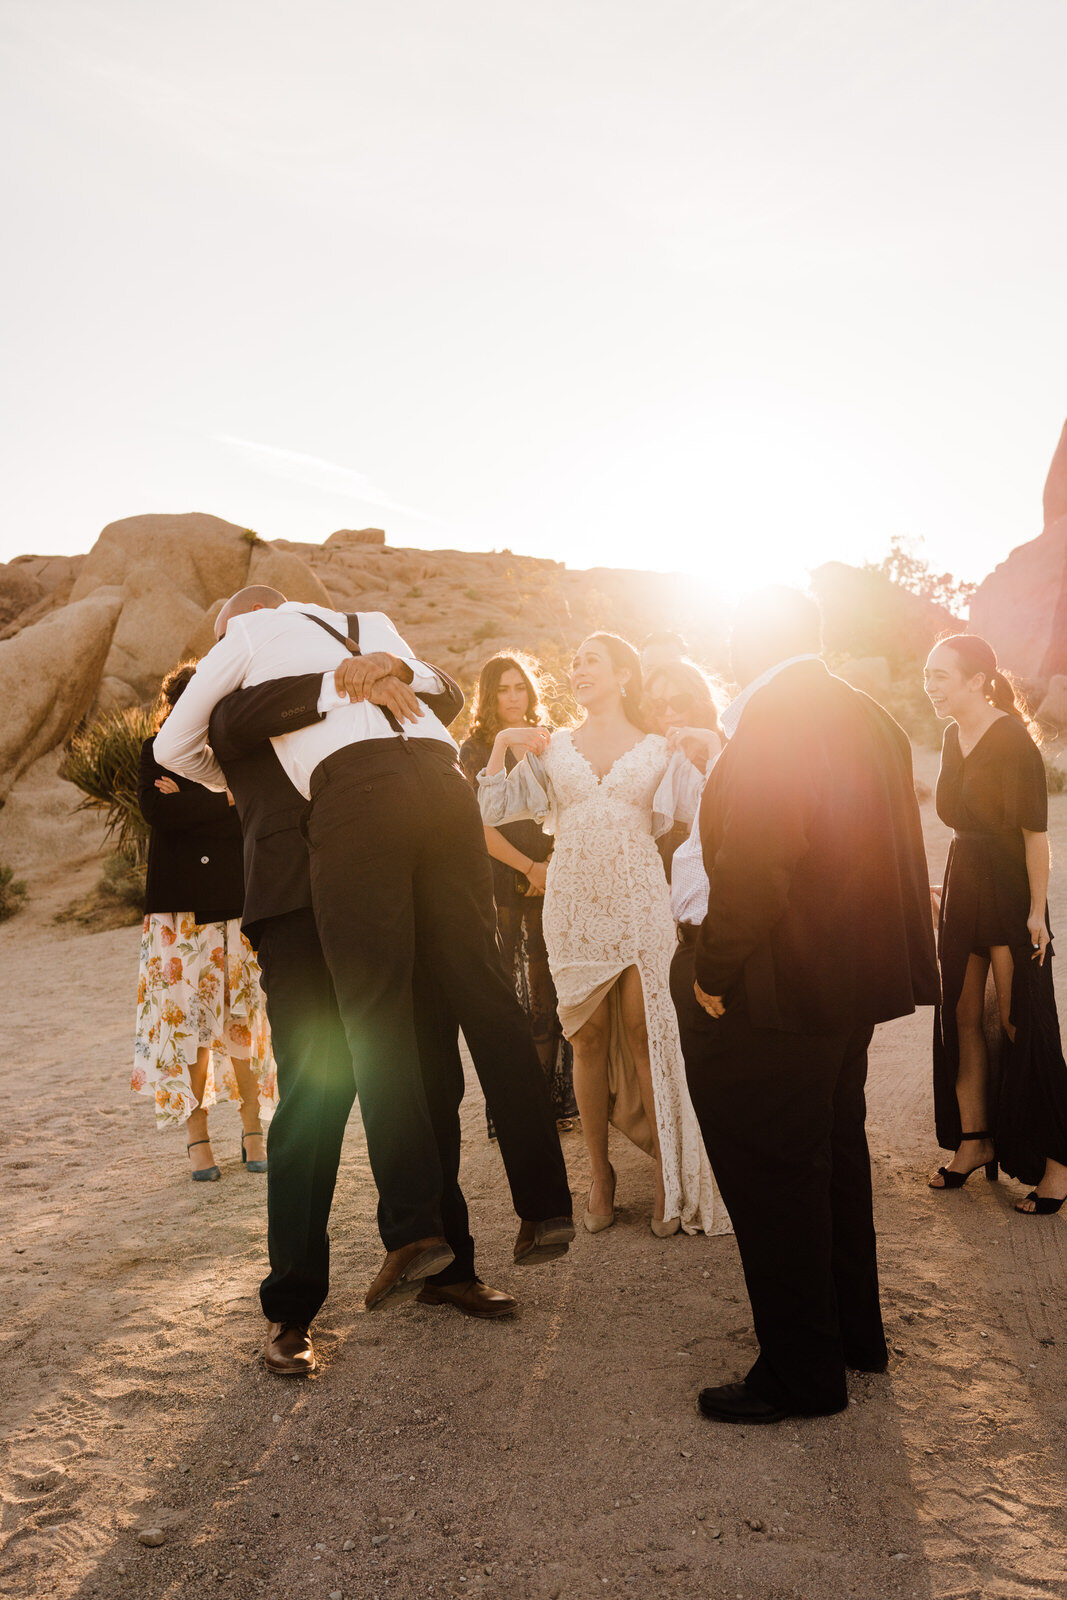 brother lifts groom in hug after elopement ceremony in Joshua Tree National Park | adventurous, fun, warm wedding photos by Kept Record | www.keptrecord.com